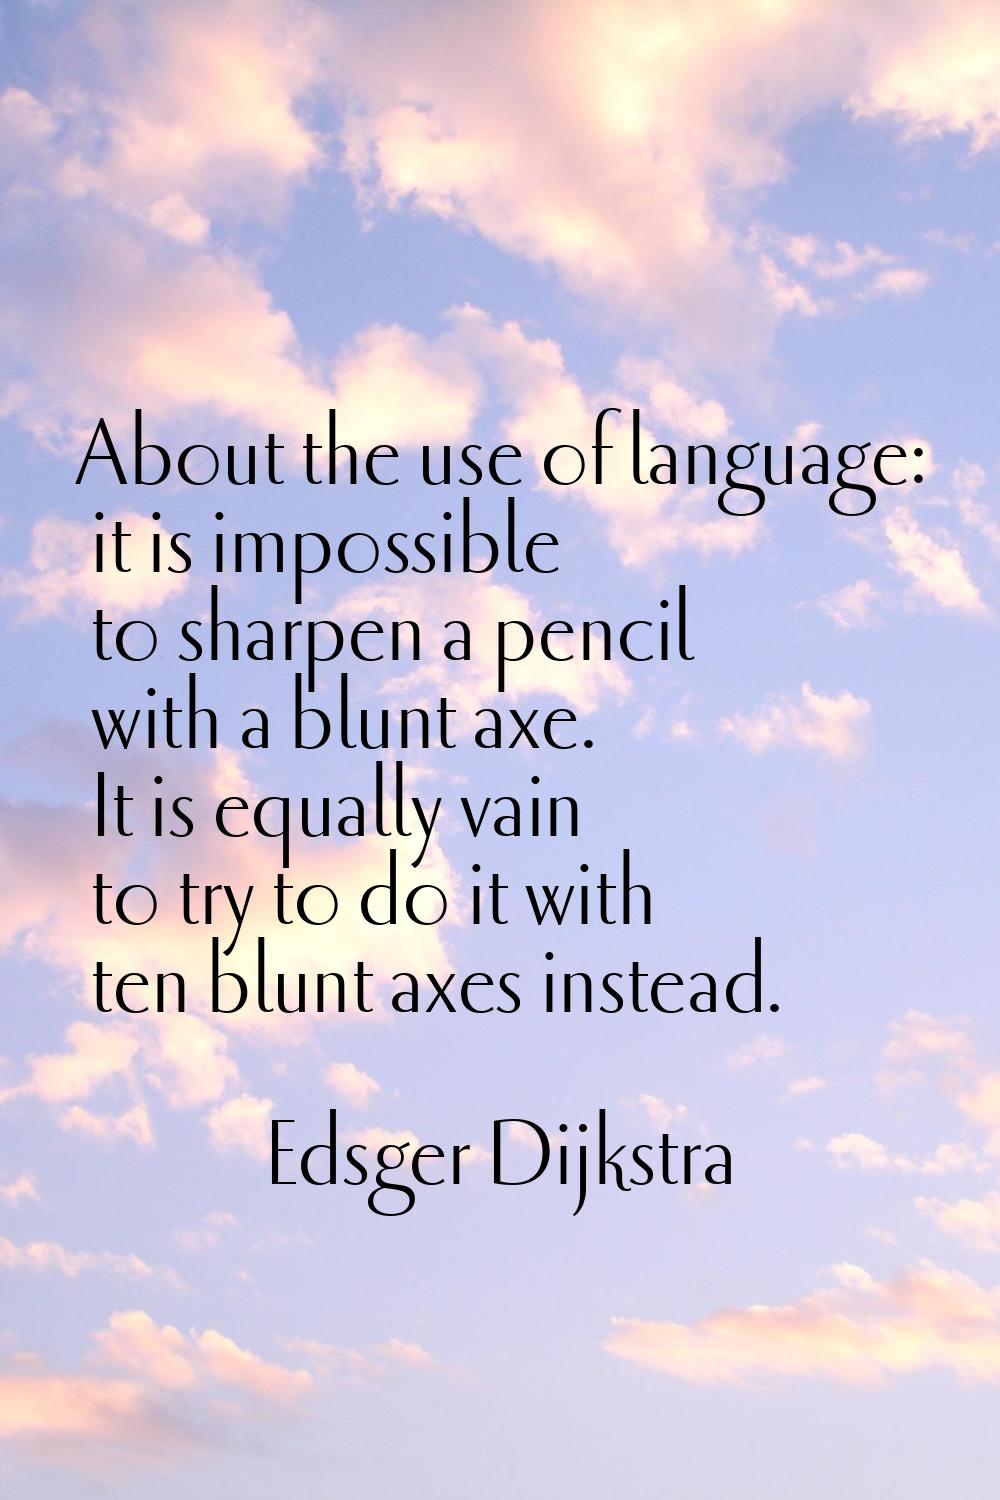 About the use of language: it is impossible to sharpen a pencil with a blunt axe. It is equally vai